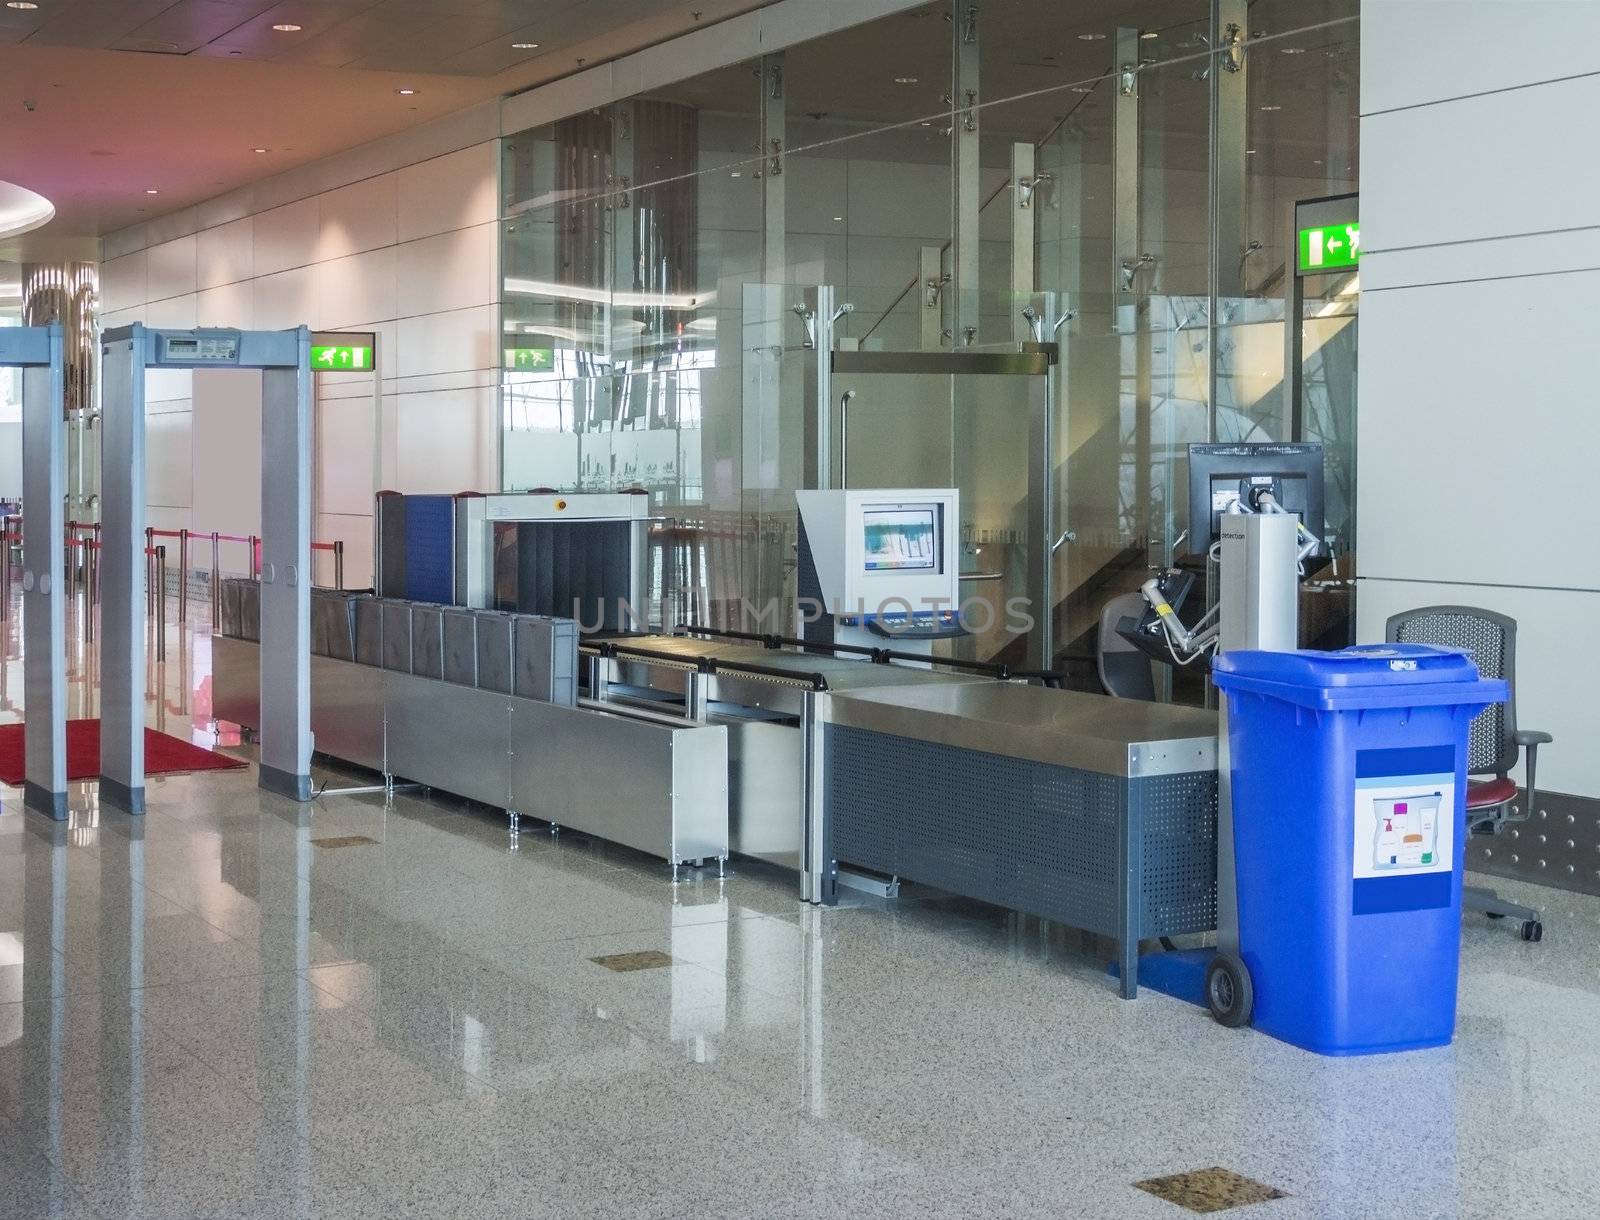 Airport baggage and passenger security check with metal detector X ray